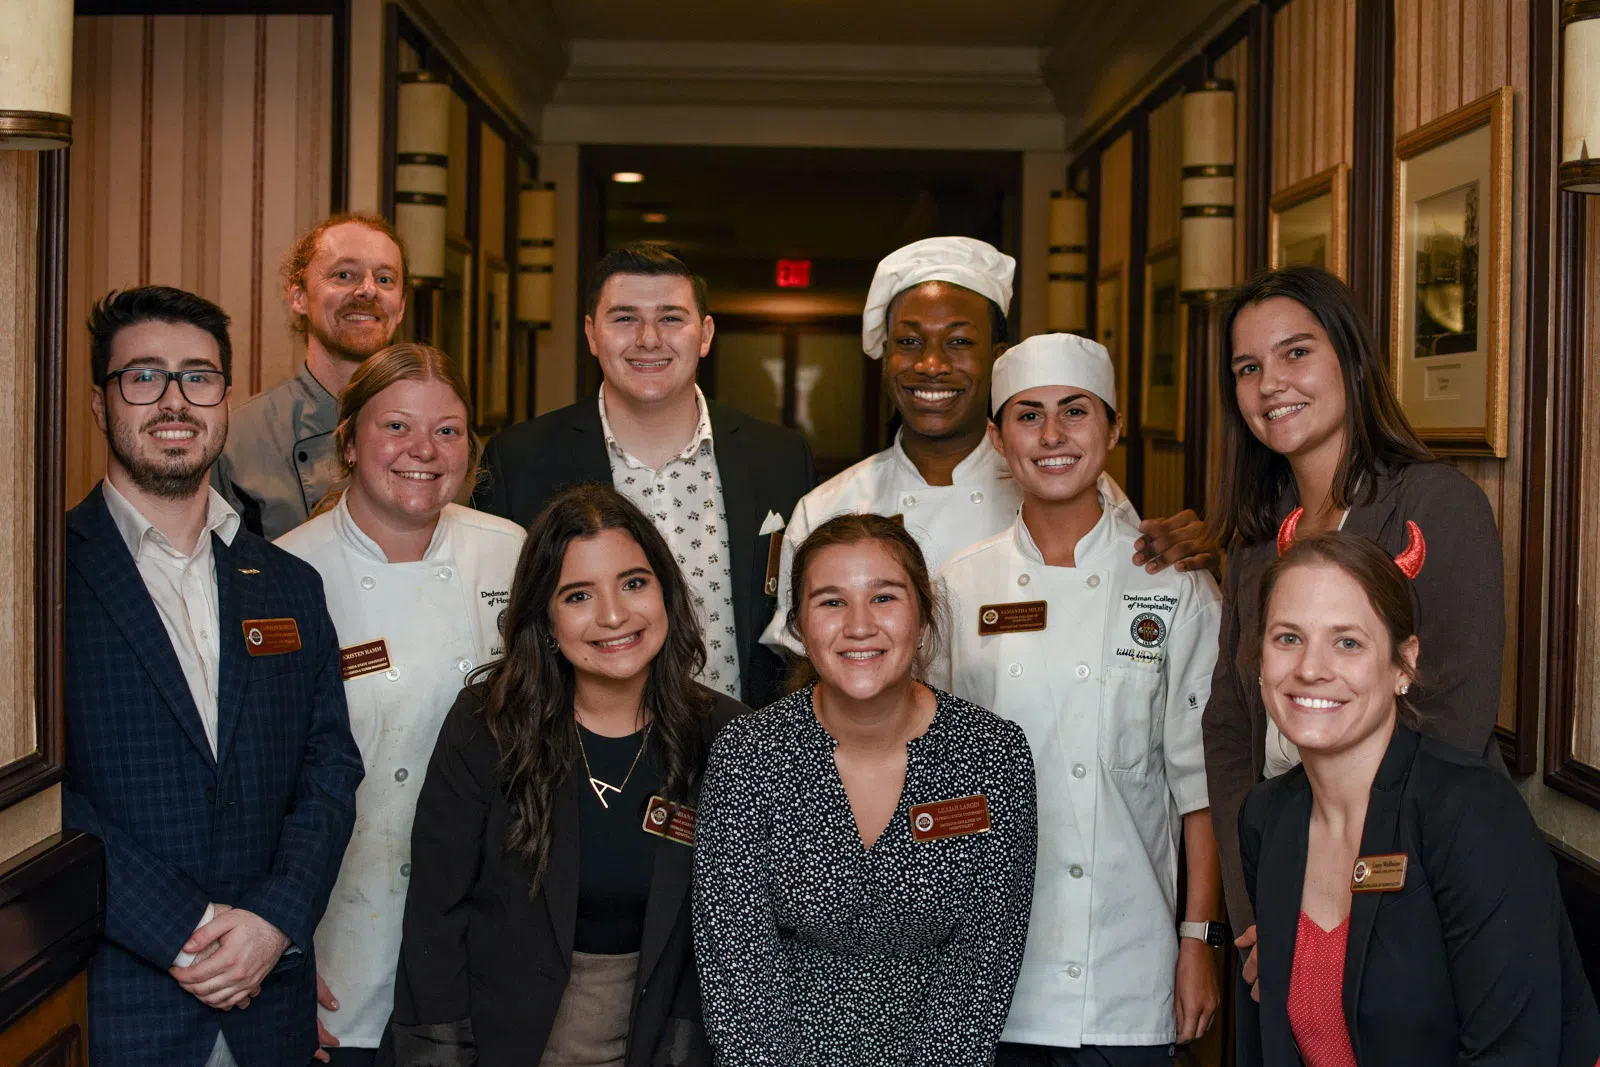 This photo features 10 students smiling at the camera after completing their portion of the Little Dinner Series.